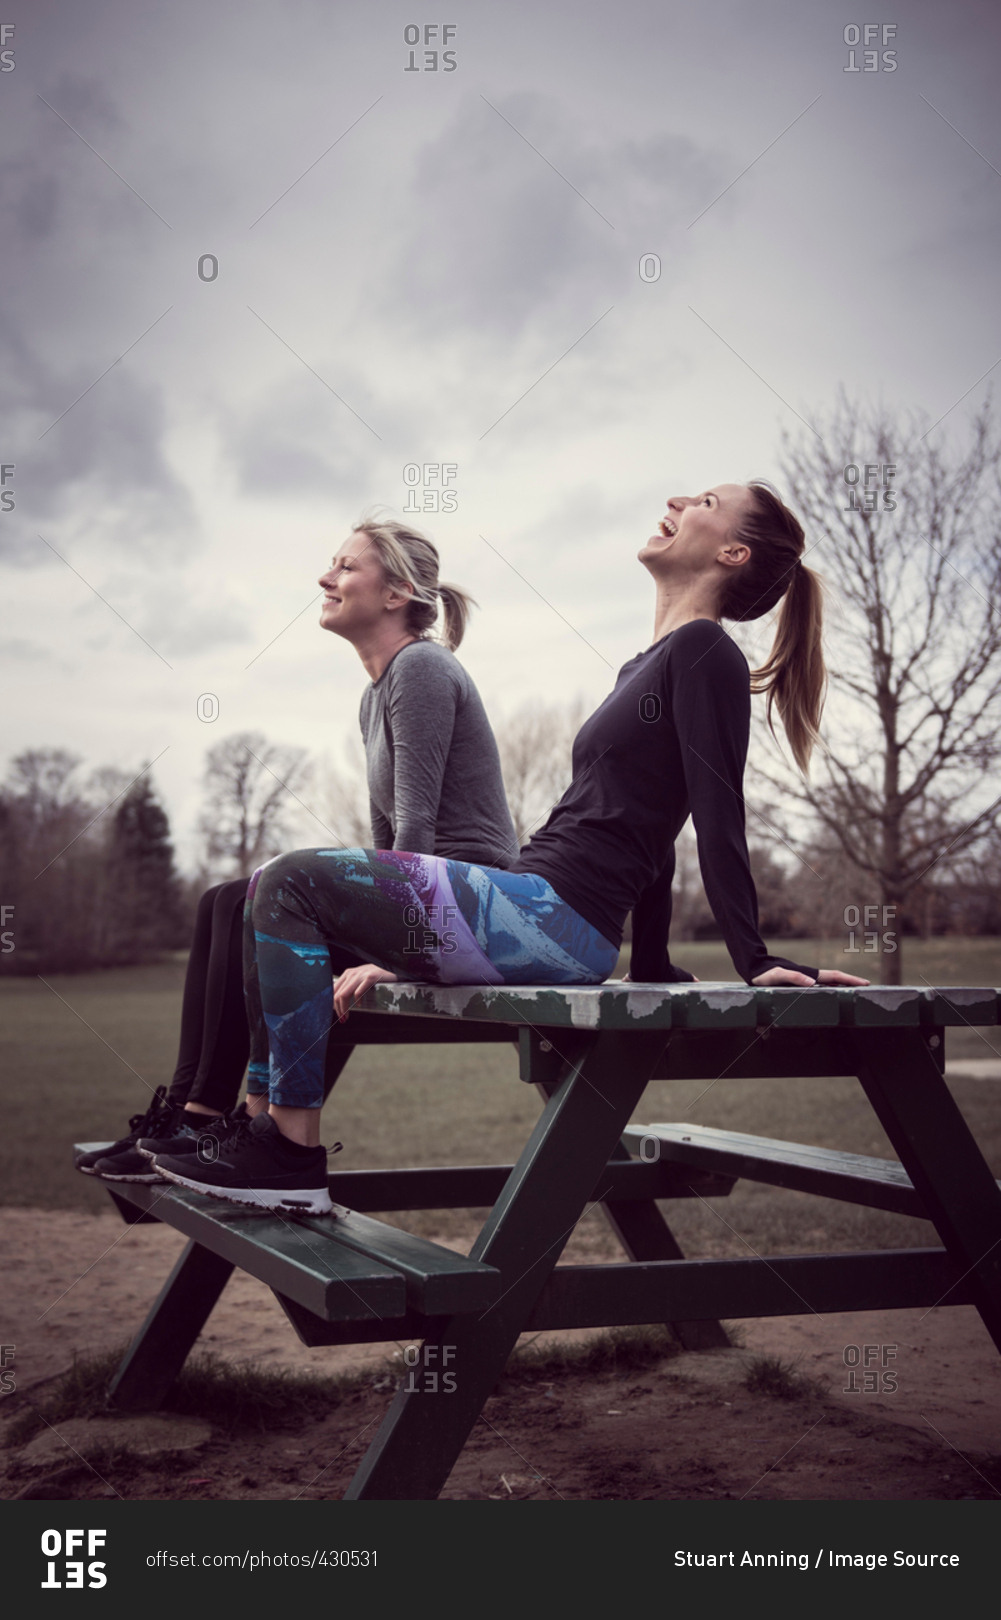 Women wearing sports clothing sitting on picnic table, head back laughing